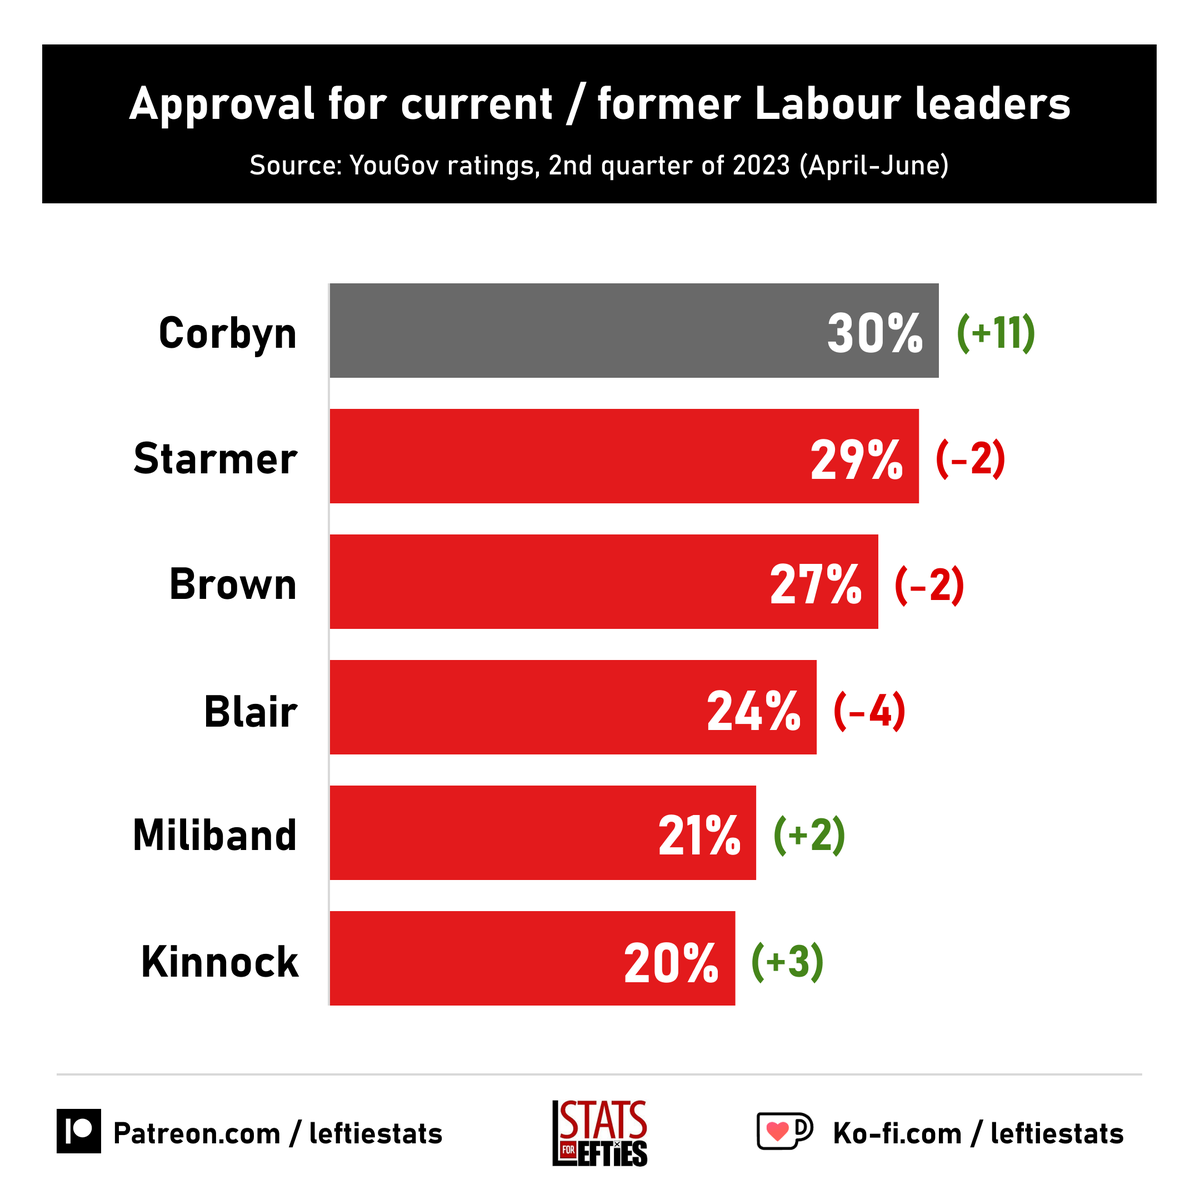 🚨 NEW: YouGov approval ratings show that Corbyn is now the most popular current / former Labour leader, beating Starmer and Blair. ⚪️ Corbyn 30% (+11) 🔴 Starmer 29% (-2) 🔴 Brown 27% (-2) 🔴 Blair 24% (-4) 🔴 Miliband 21% (+2) Via @YouGov, Apr-Jun 2023 (+/- vs Jan-Mar)